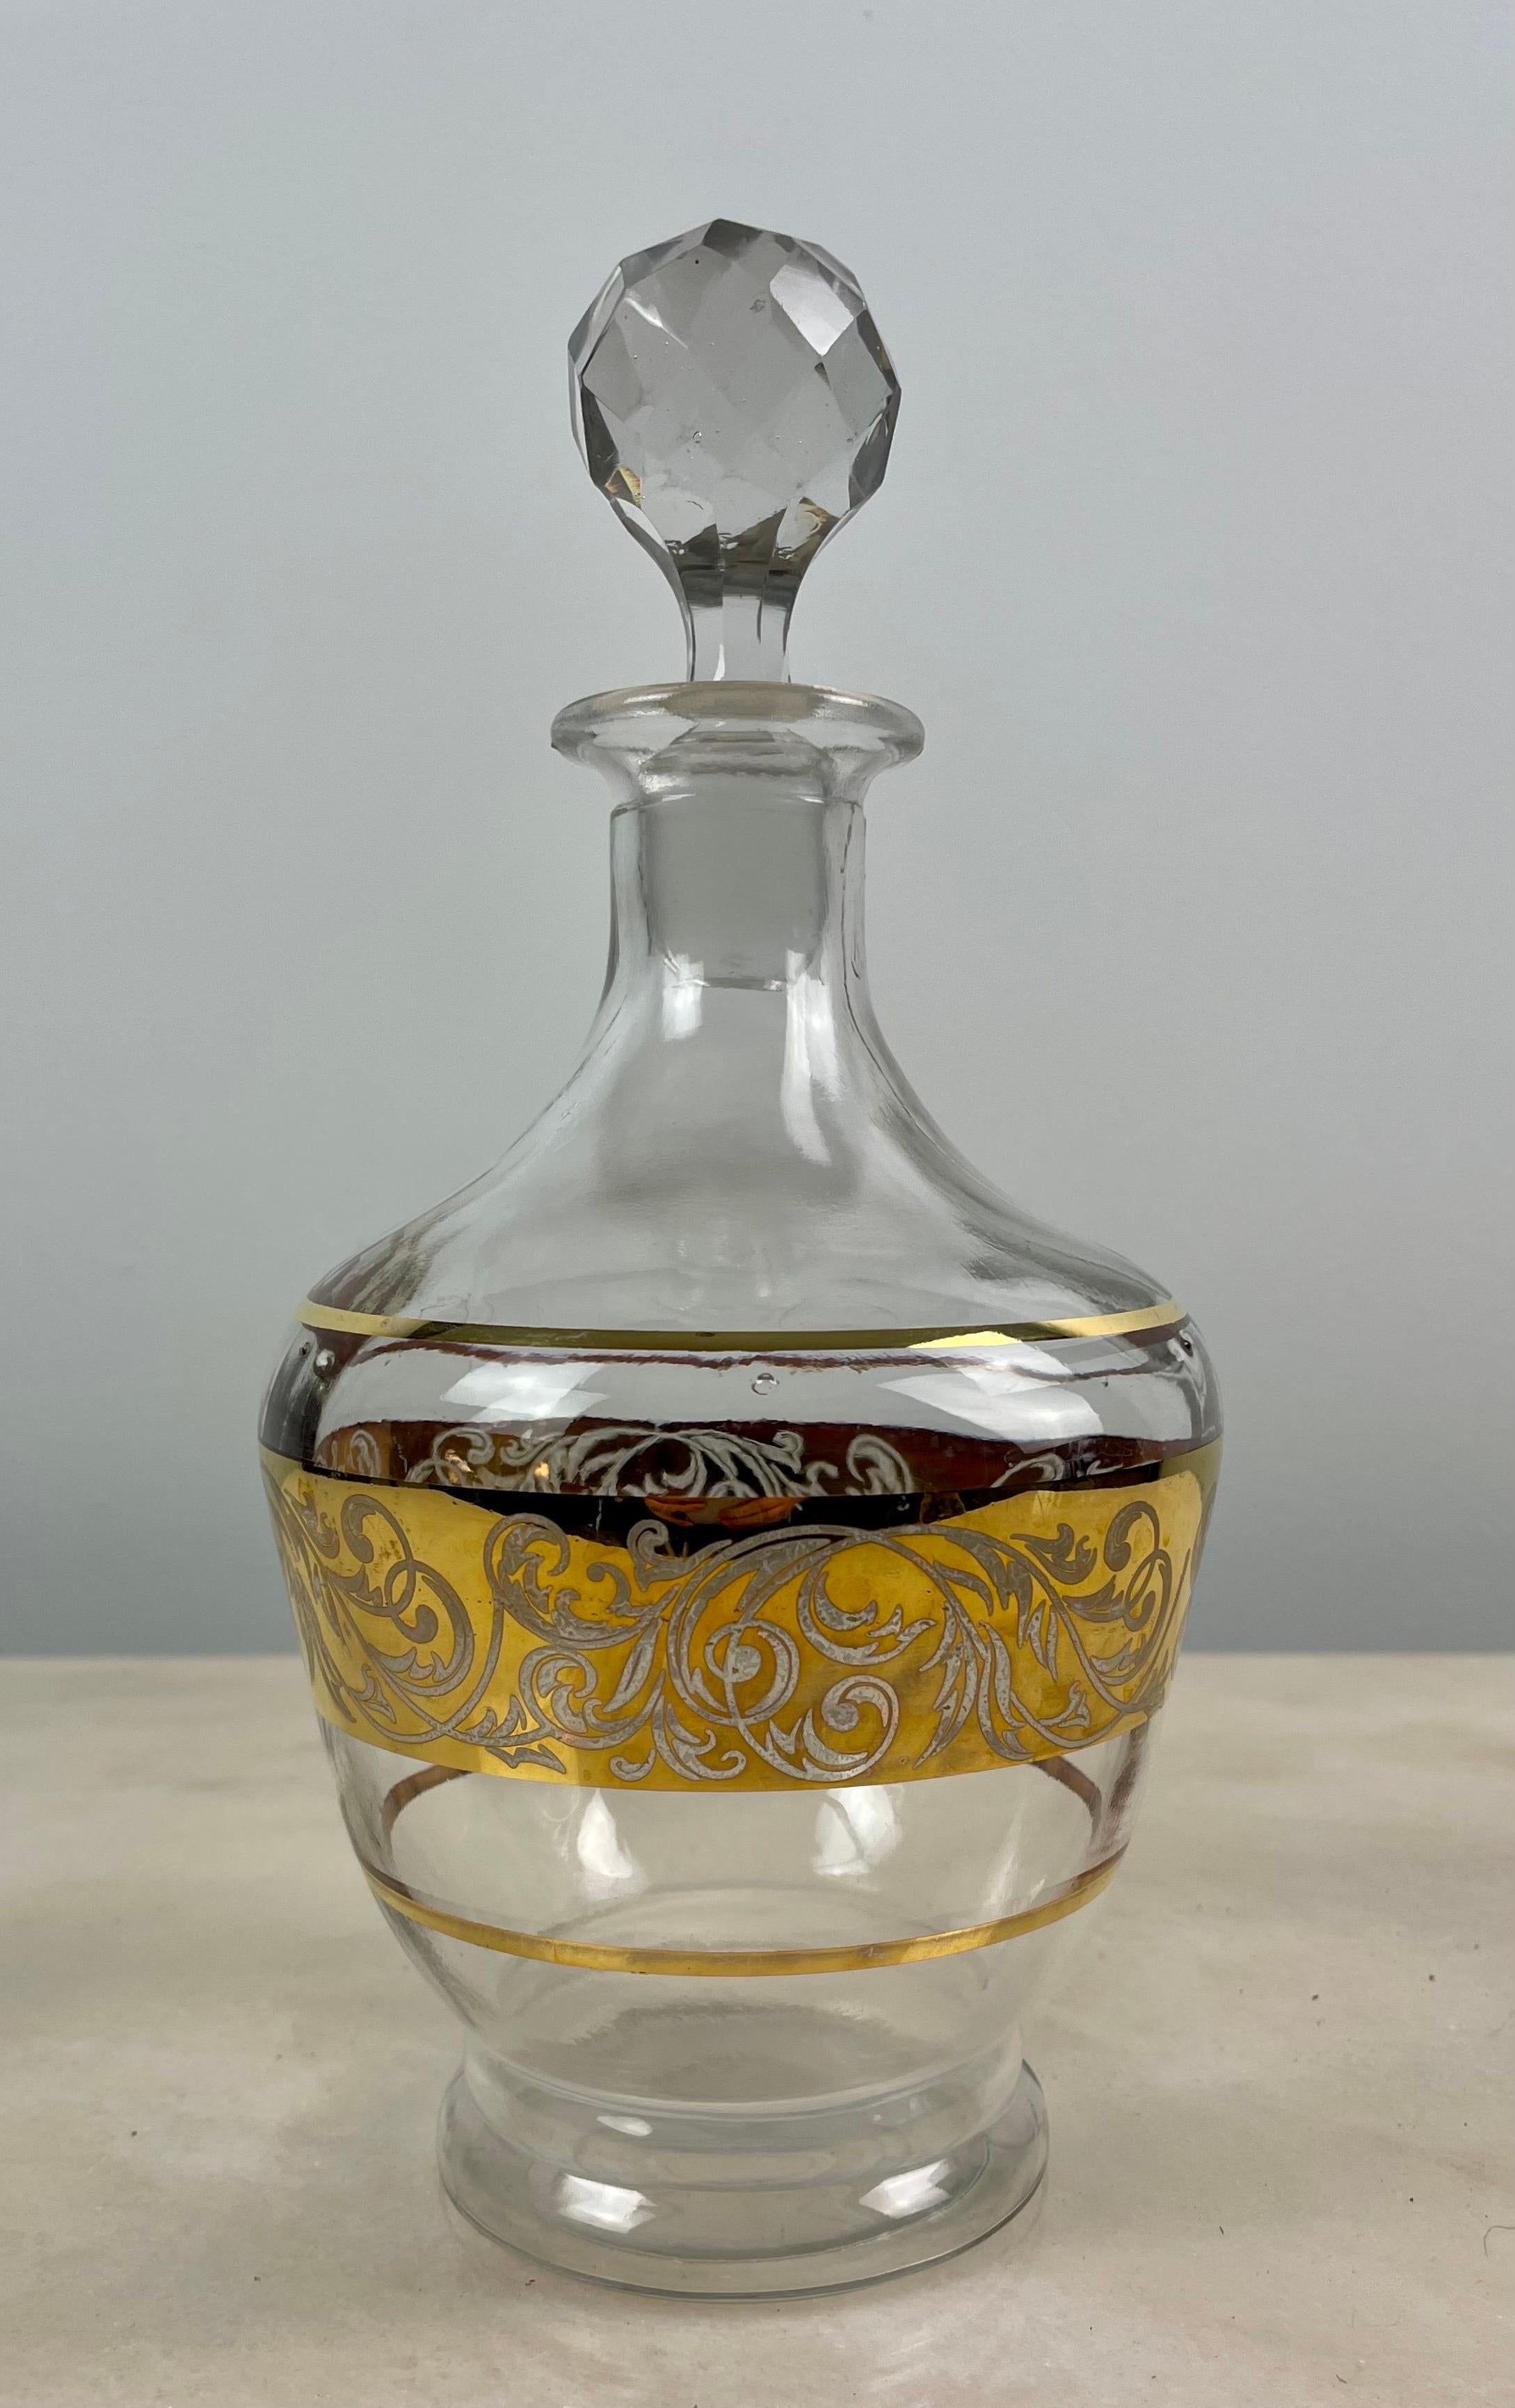 Charming glass decanter with its cut glass stopper.
Carafe decorated with gilded edging and band of gilded foliage.
Circa 1950.